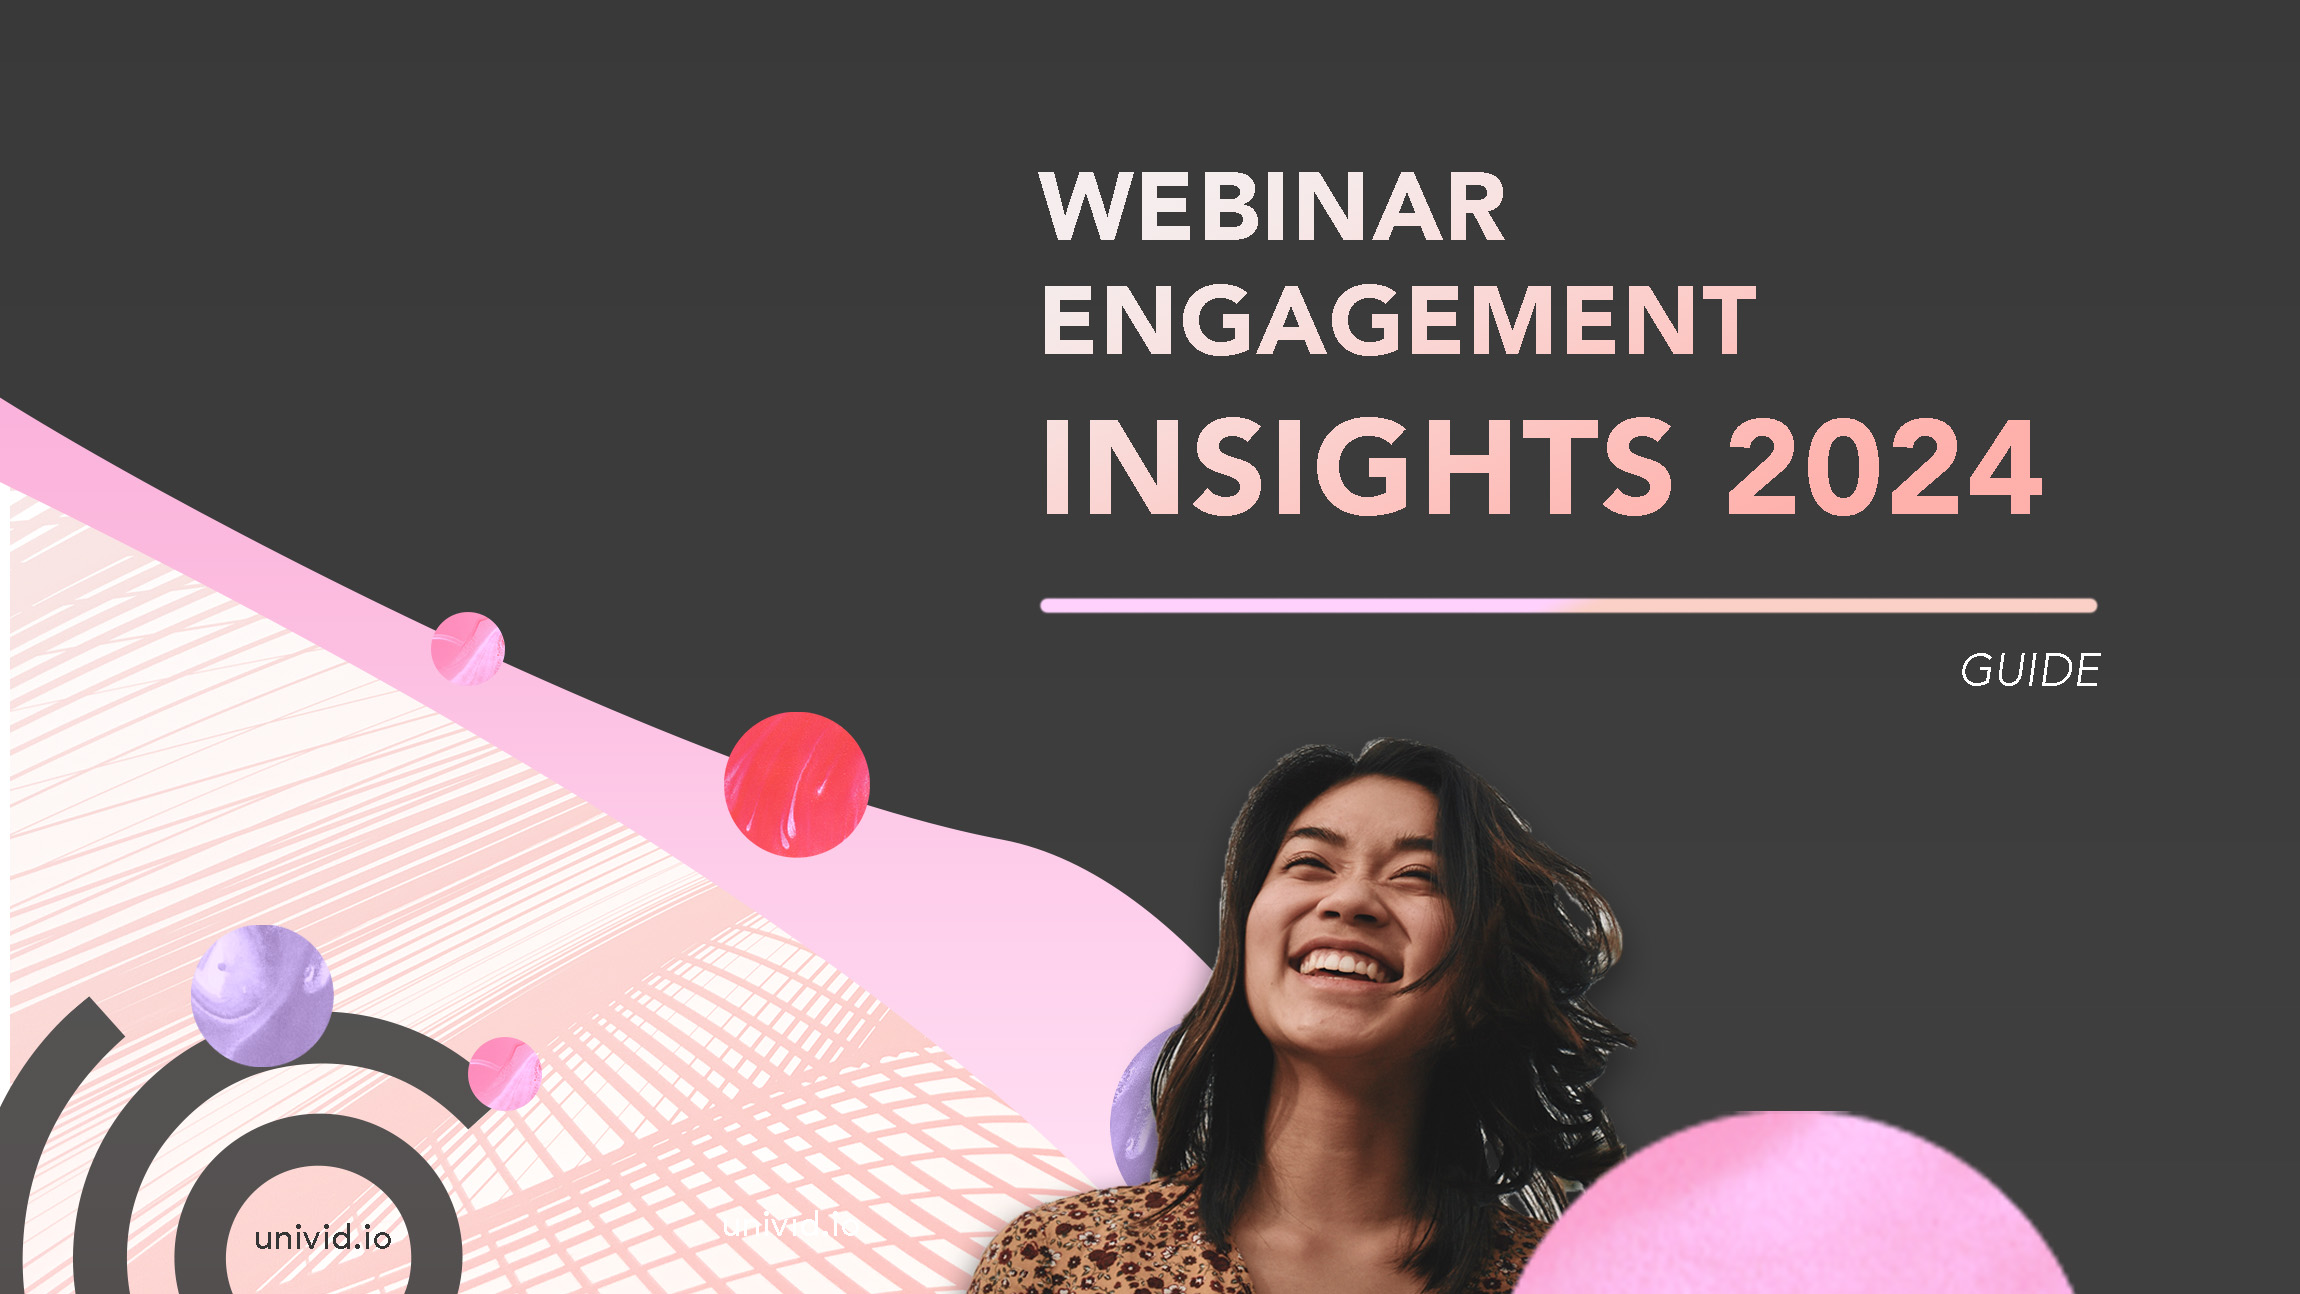 Want to maximize the impact of your webinar efforts? Here are the Webinar Engagement Insights 2024. These are the 6 best tips for interaction, based on analyzing 1000s of engaging webinars.